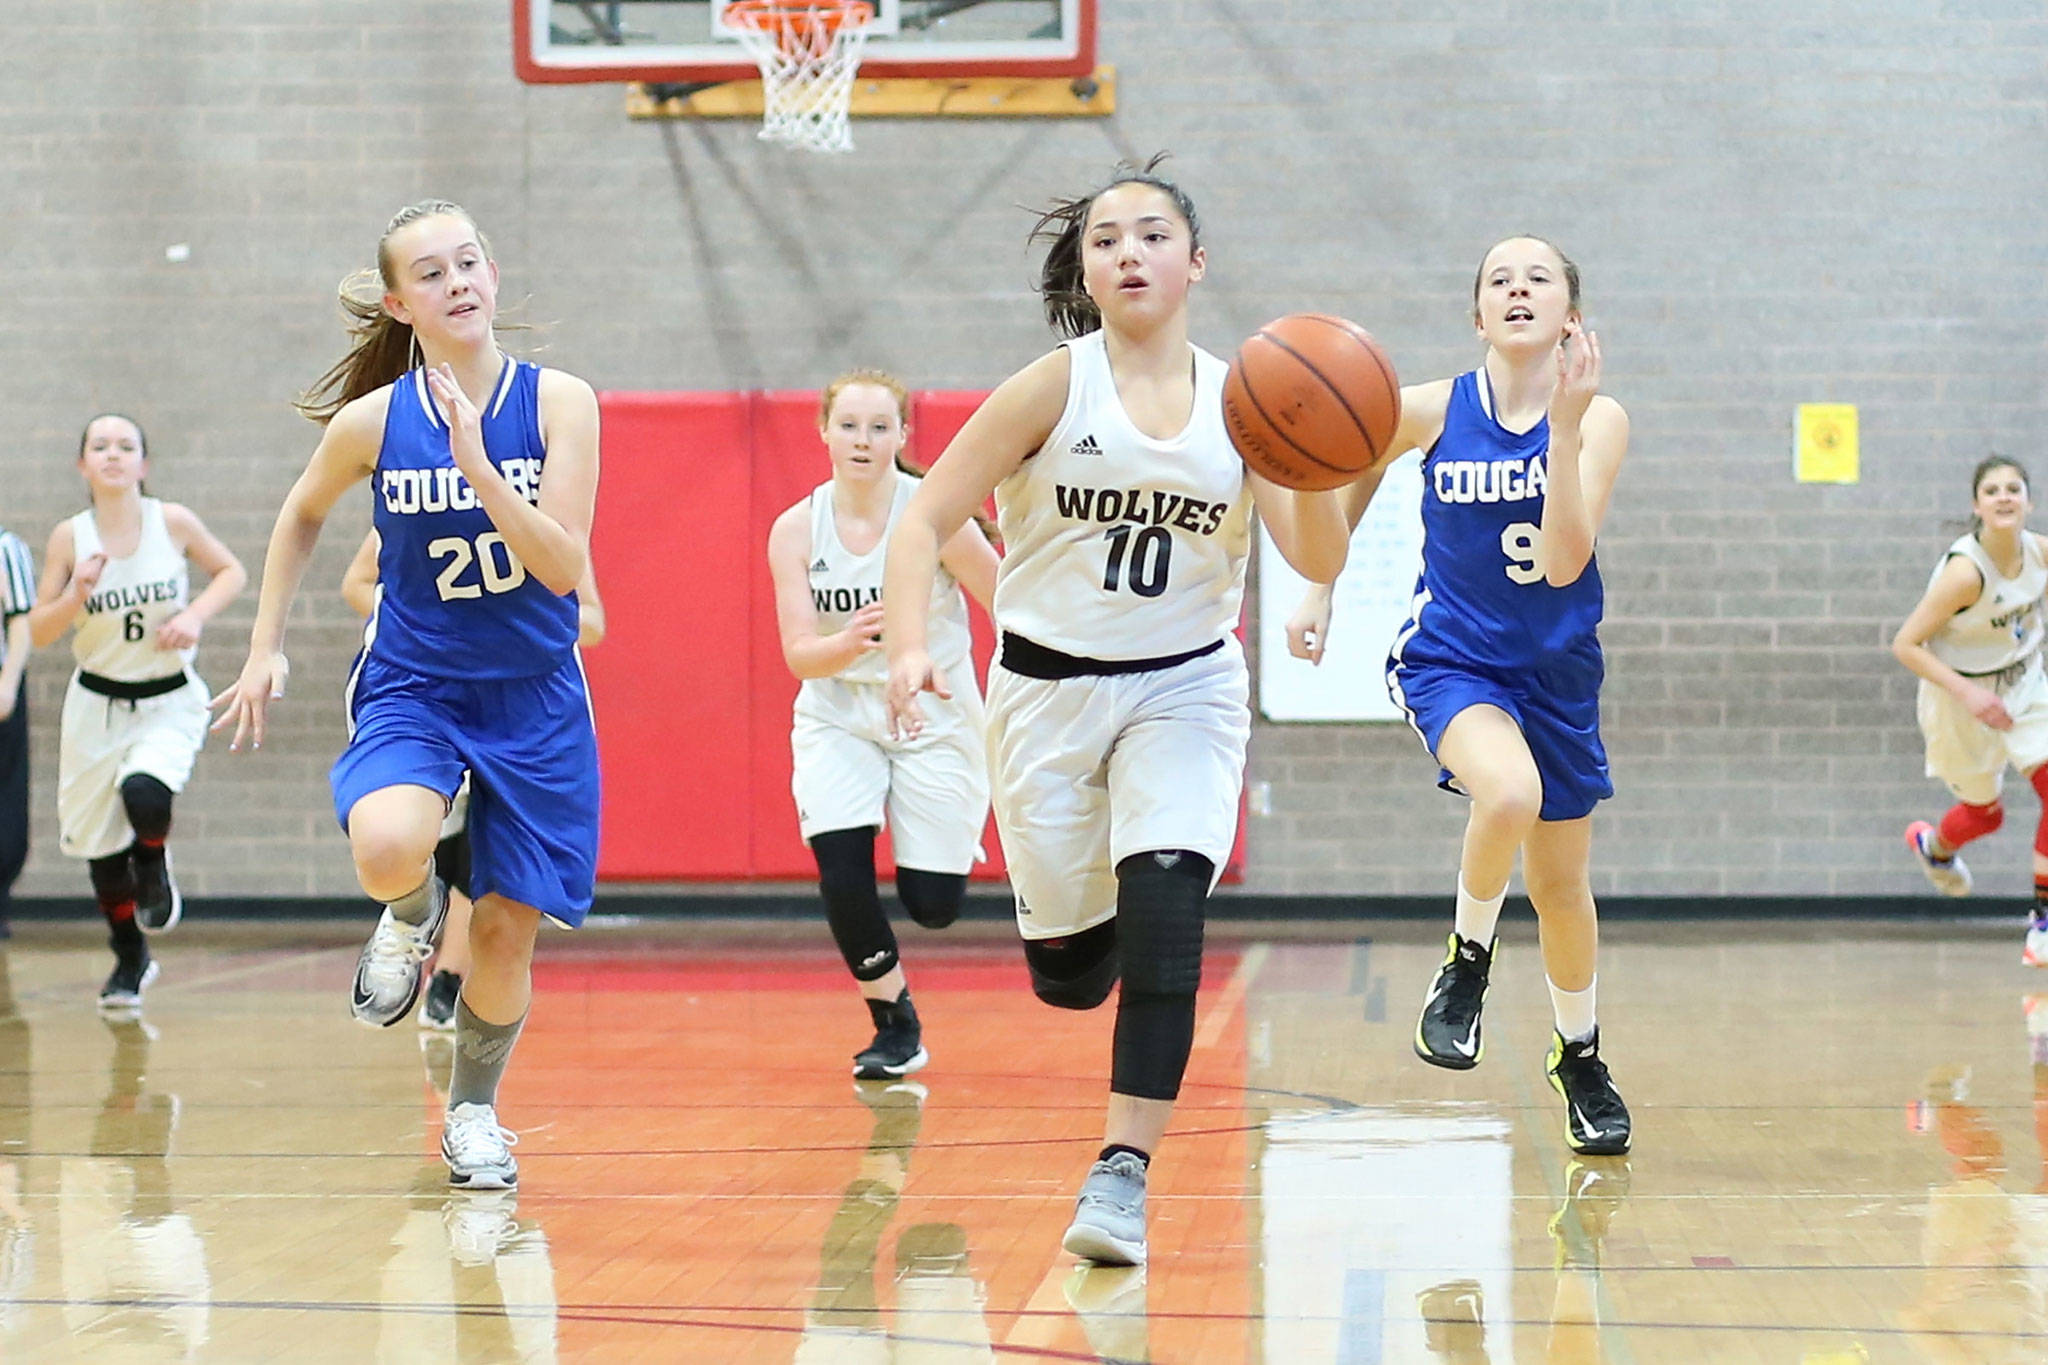 Coupeville’s Alita Blouin takes off on a breakaway in Wednesday’s win over South Whidbey. (Photo by John Fisken)